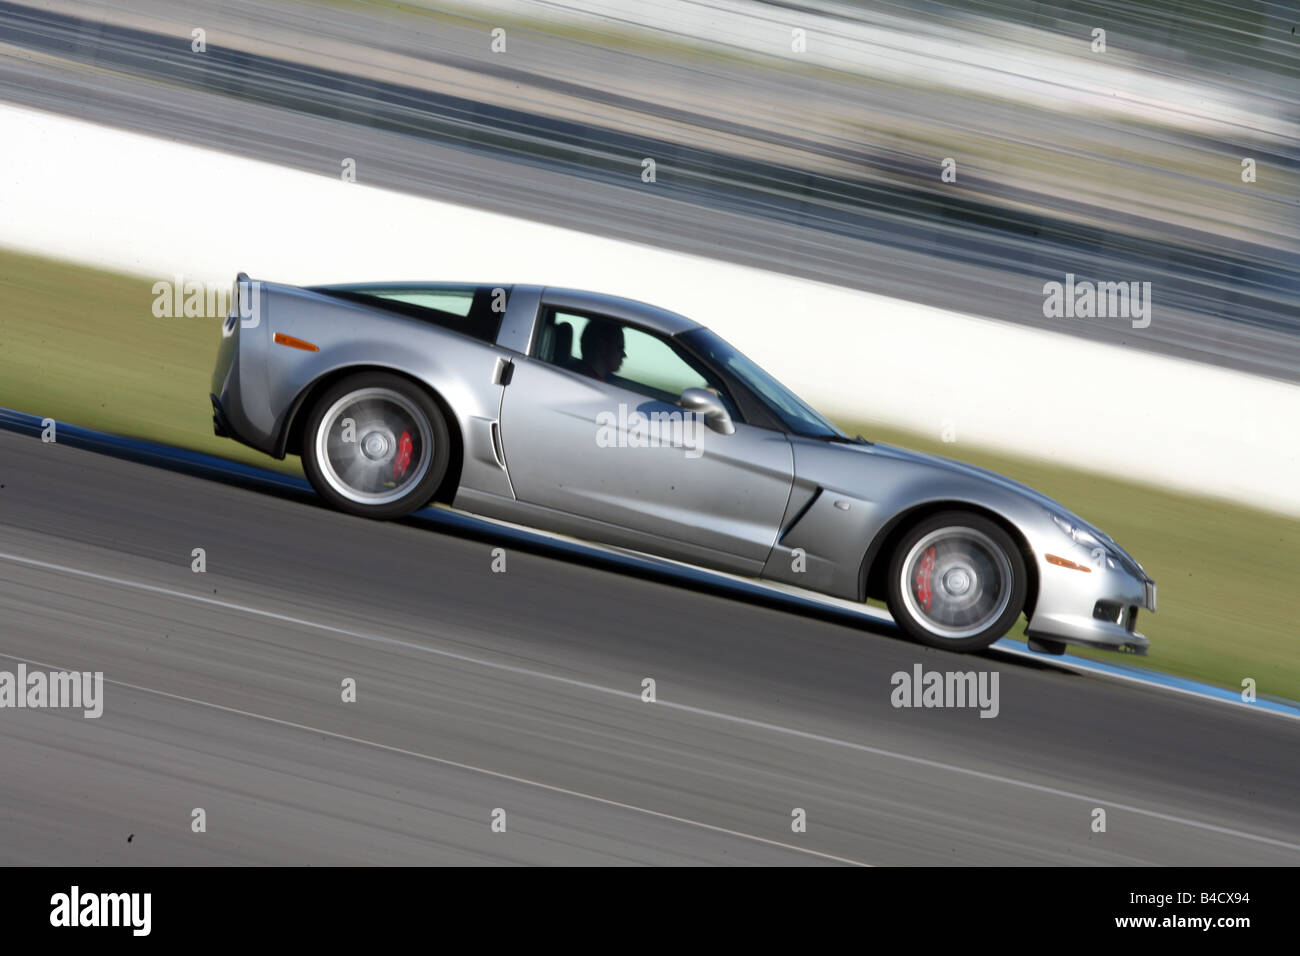 Corvette Z06, model year 2006-, silver, driving, side view, test track Stock Photo